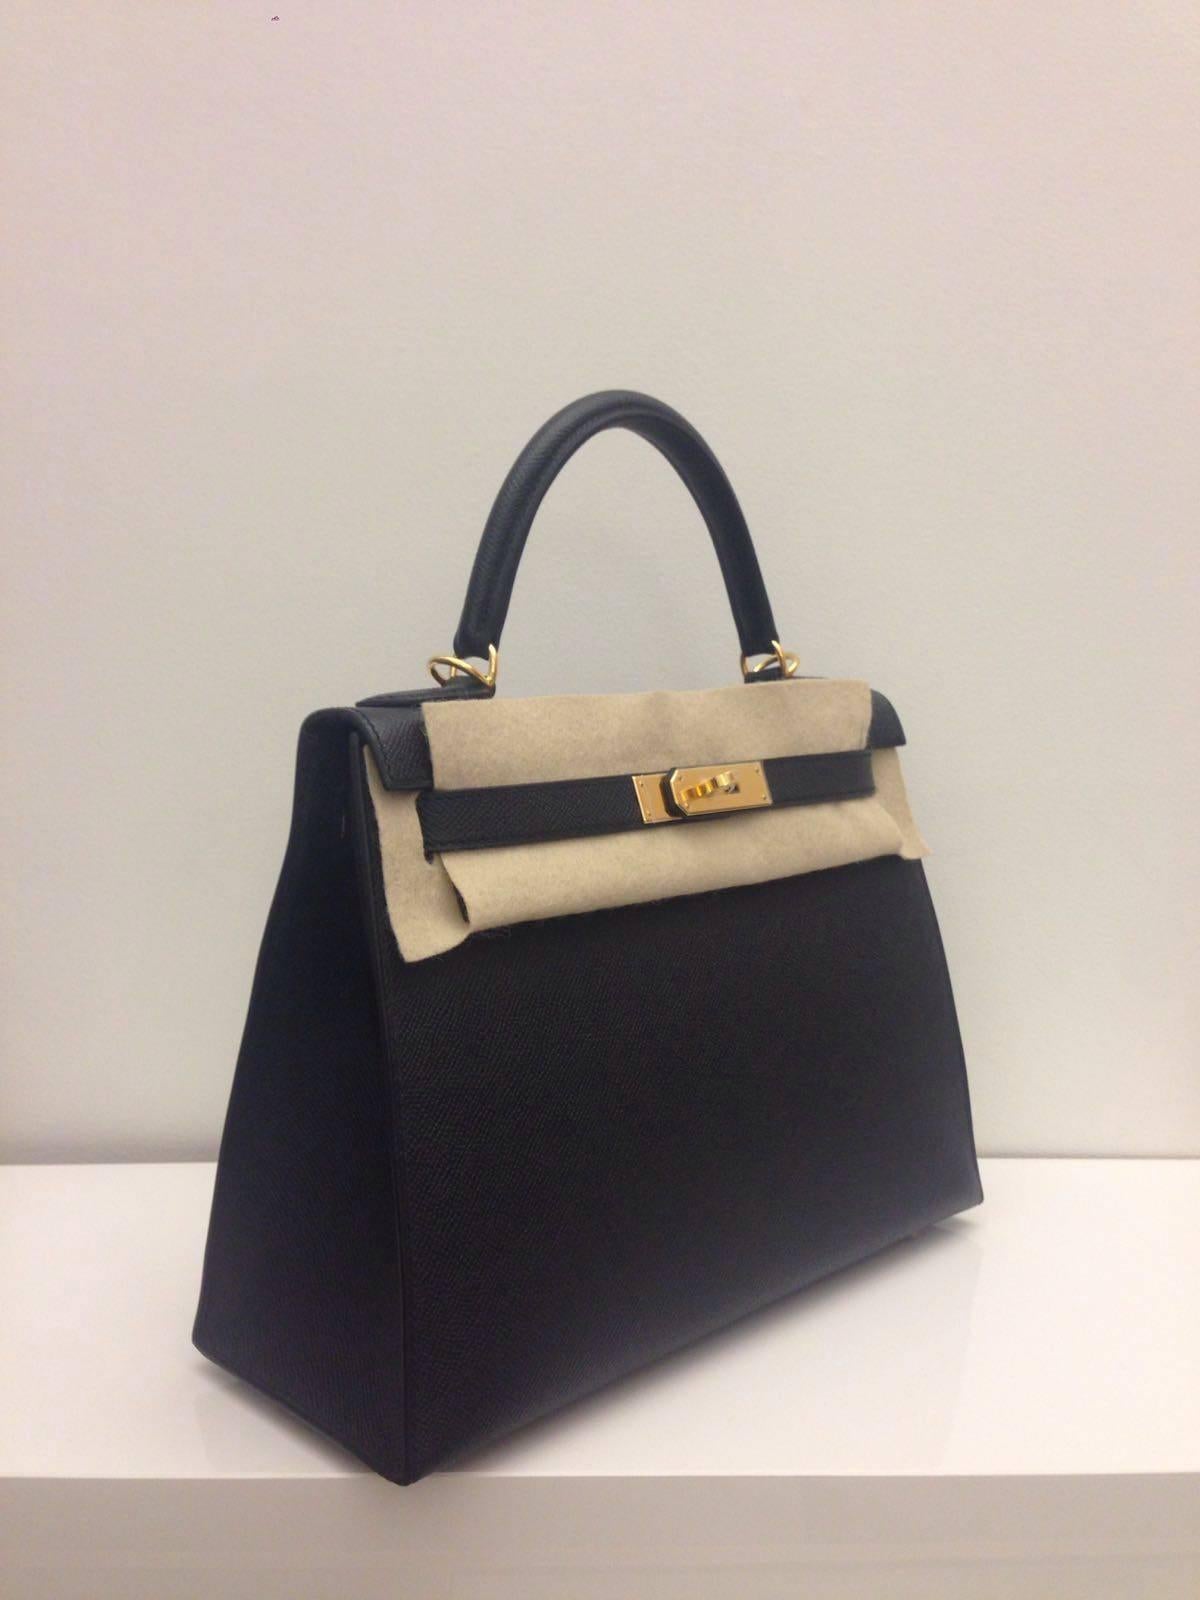 Hermes 
Kelly Size 28
Epsom leather 
Colour Noir (black)
Gold Hardware 
store fresh, comes with receipt and full set (dust bag, box...) 
Hydeparkfashion specializes in sourcing and delivering authentic luxury handbags, mainly Hermes, to client